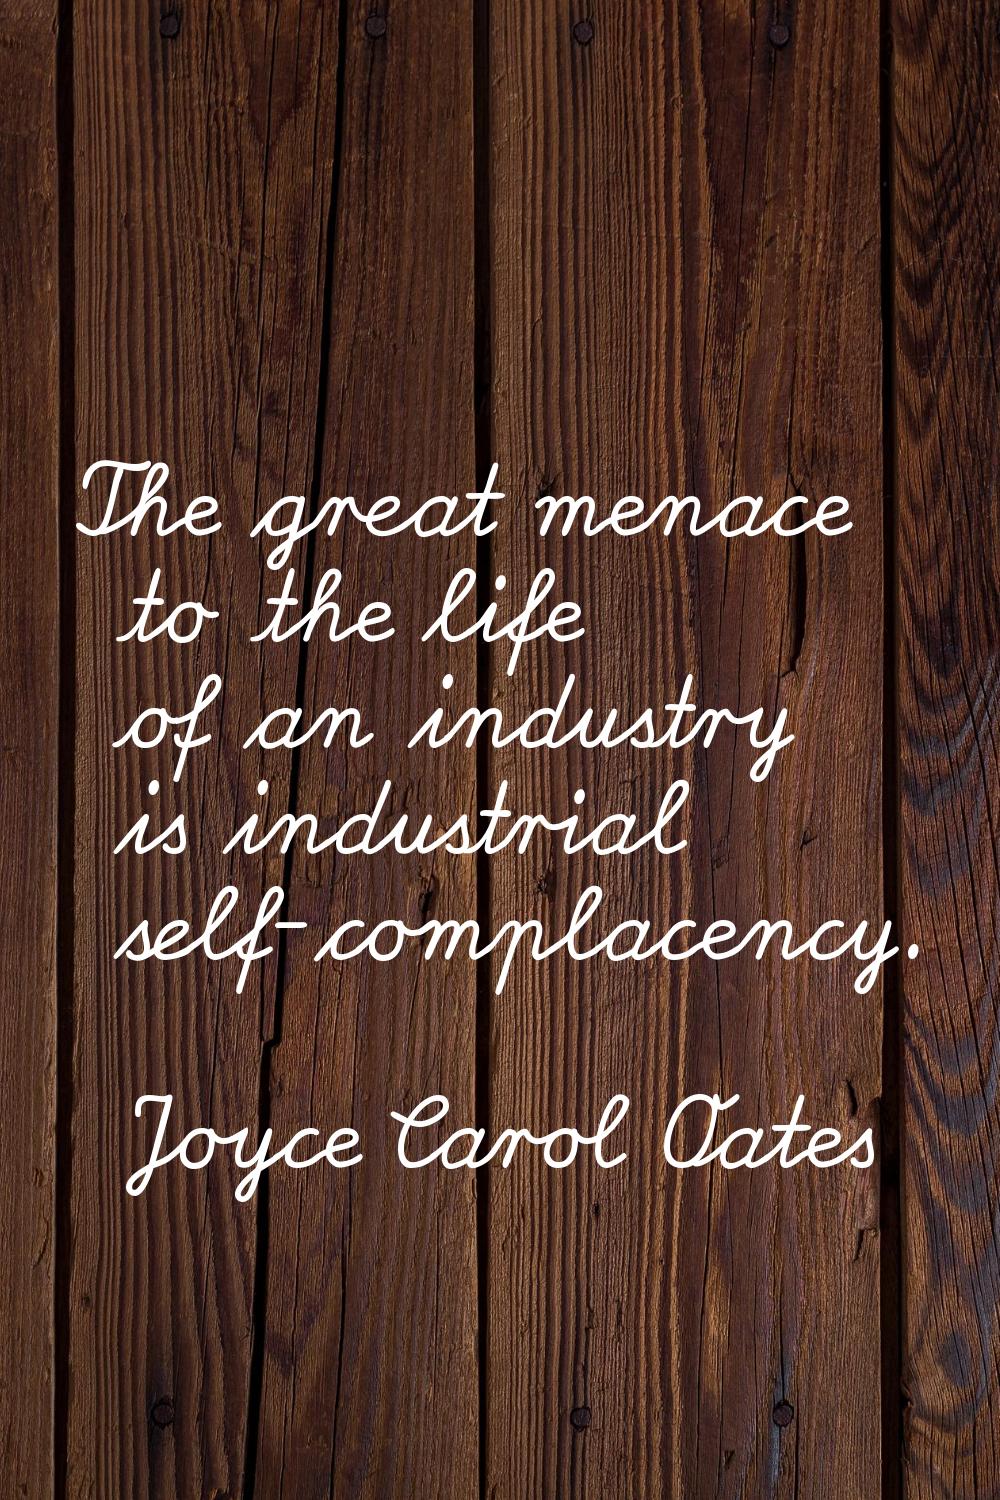 The great menace to the life of an industry is industrial self-complacency.